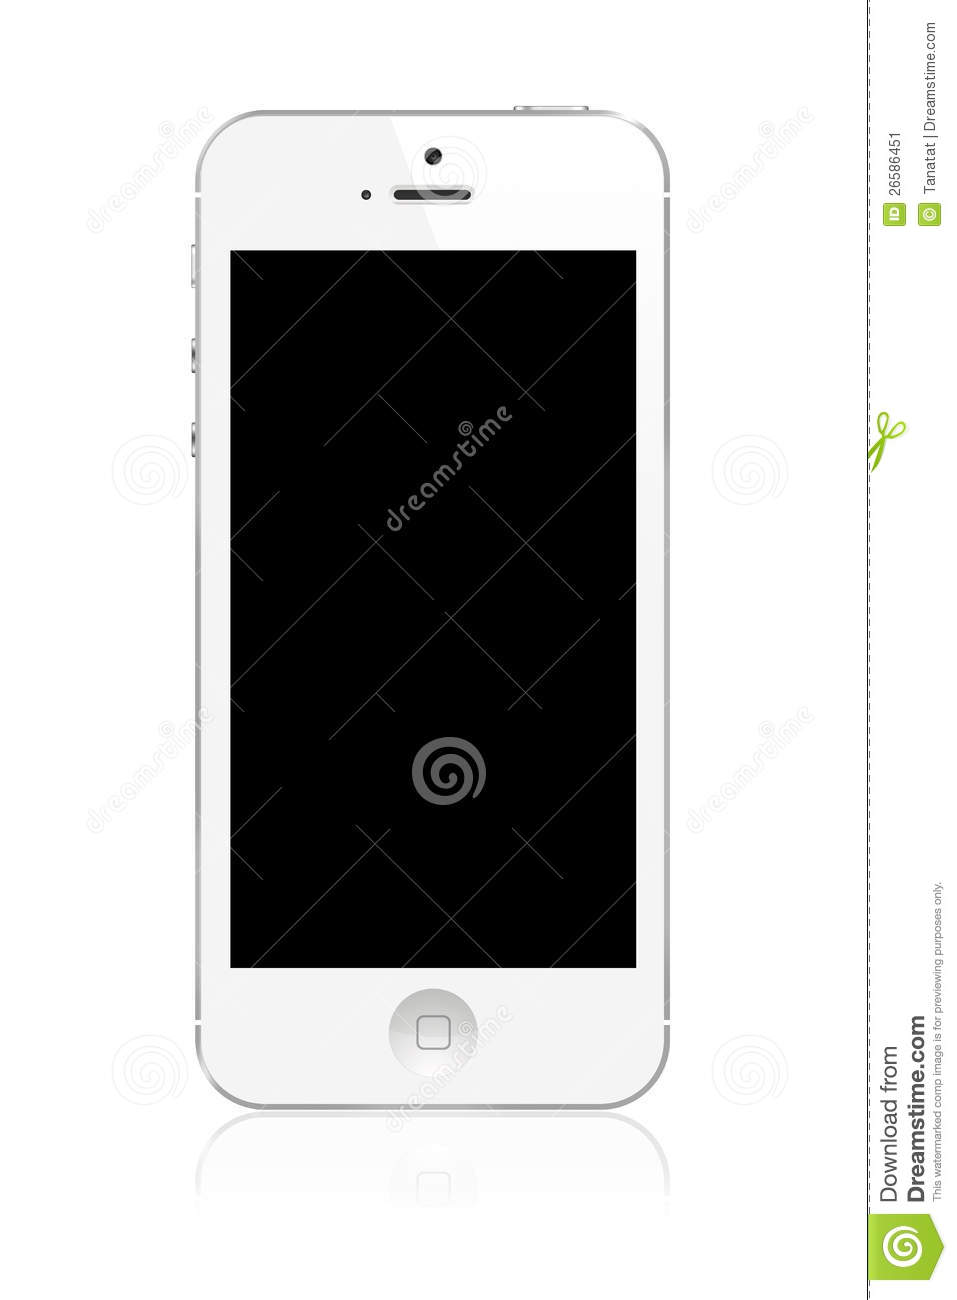 Iphone 5 Clipart Black And White Iphone 5 Clipart Black And